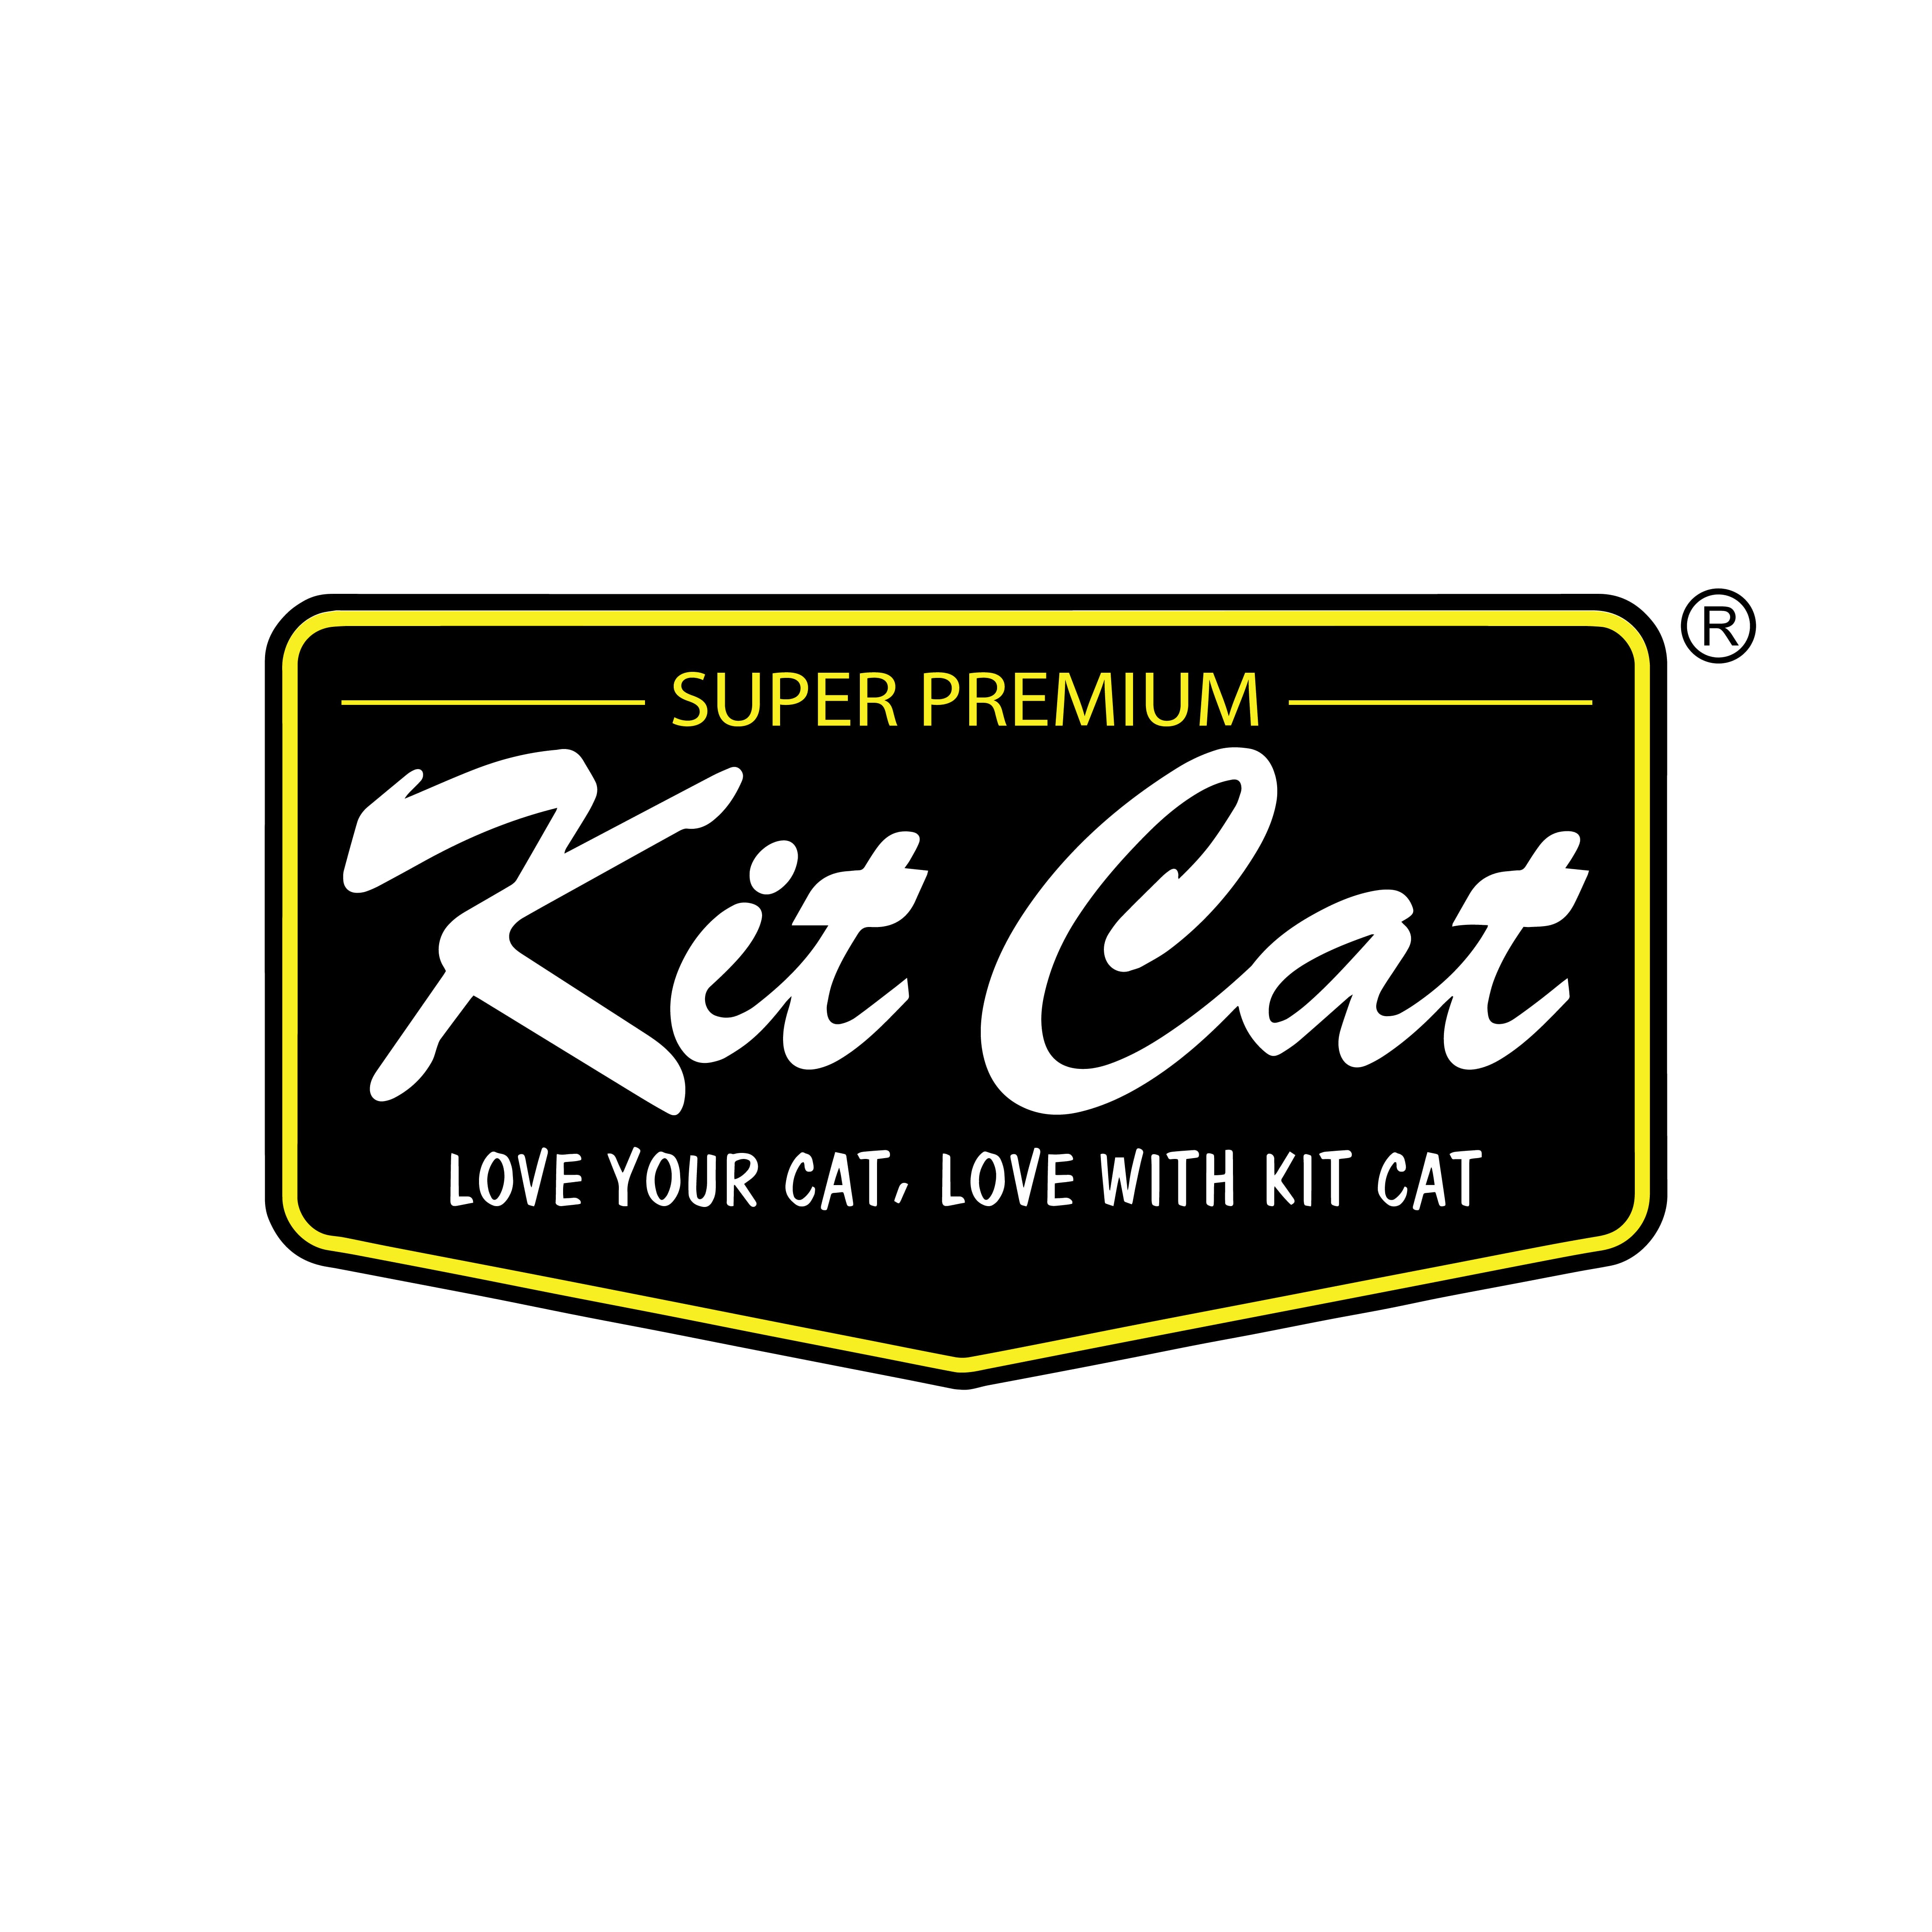 Kit Cat Featured Brand Page